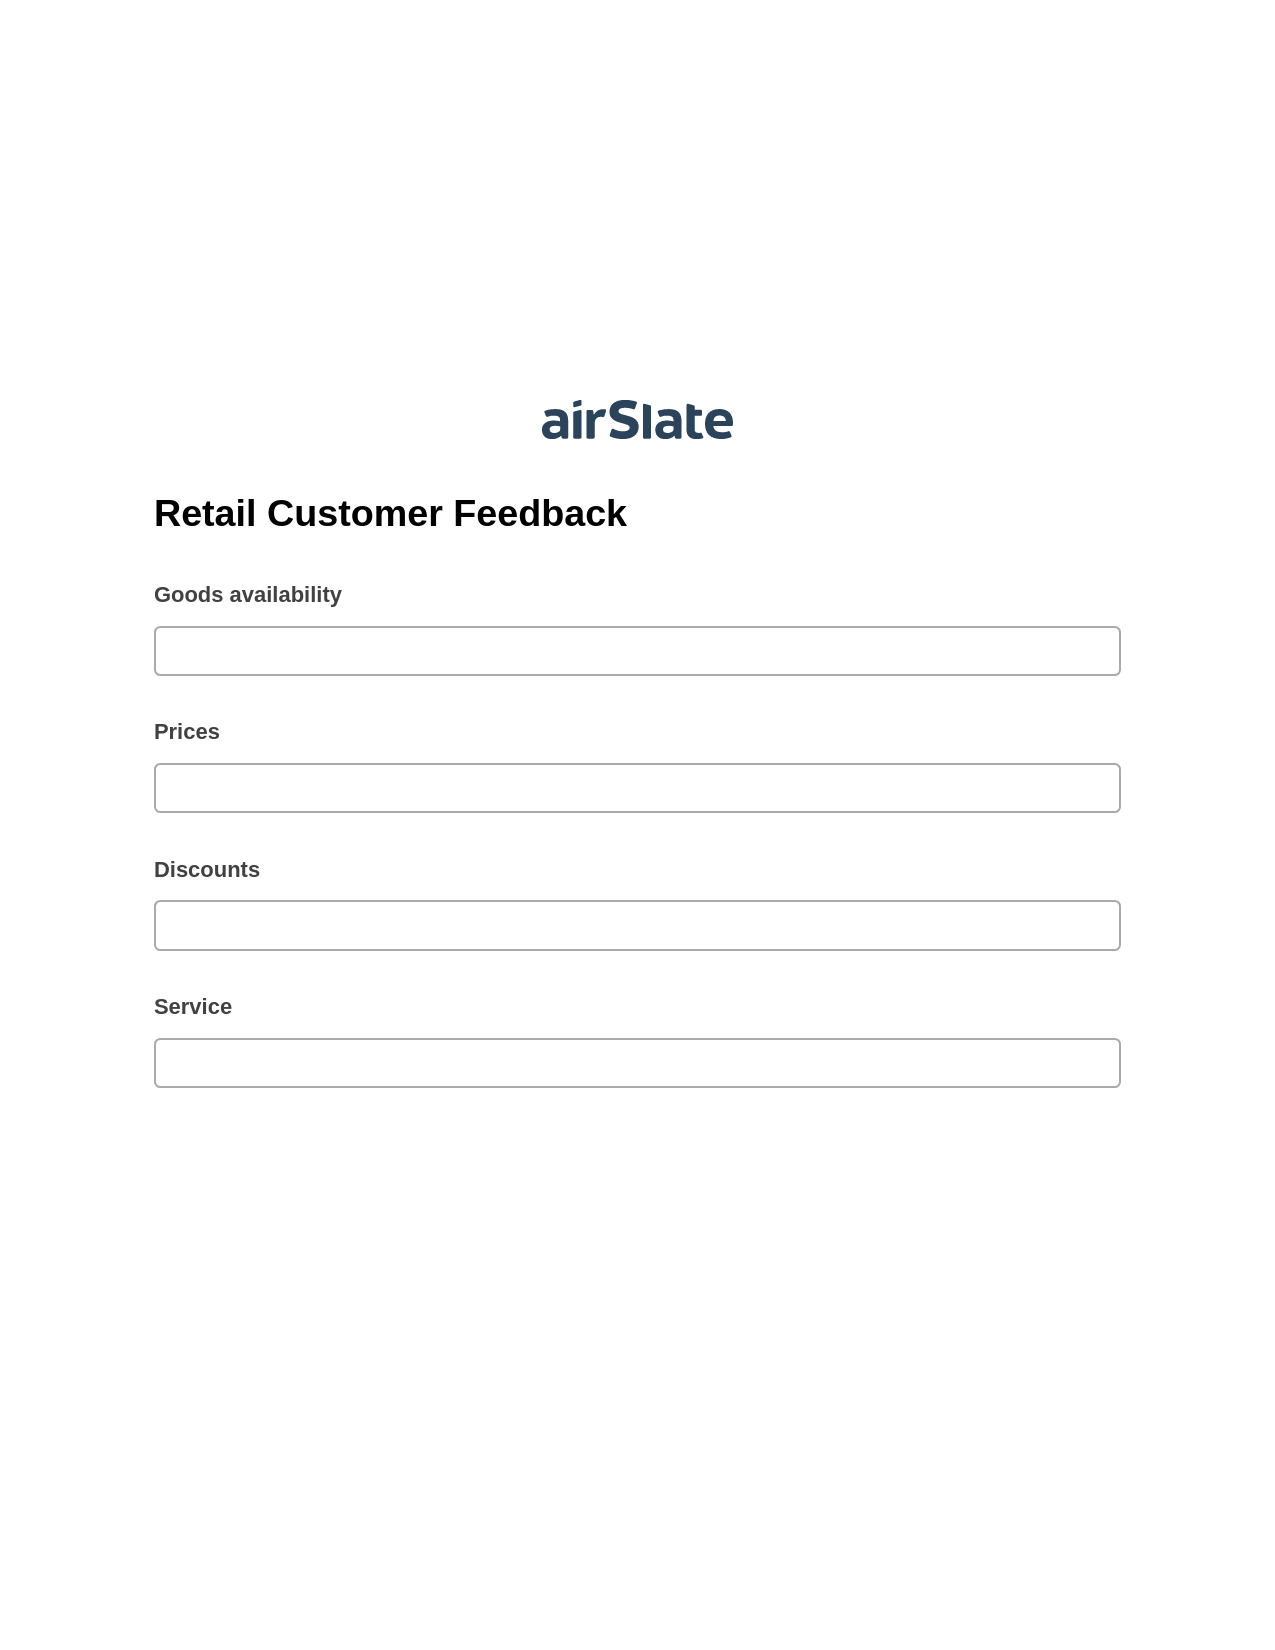 Retail Customer Feedback Pre-fill from CSV File Bot, Update NetSuite Records Bot, Webhook Postfinish Bot